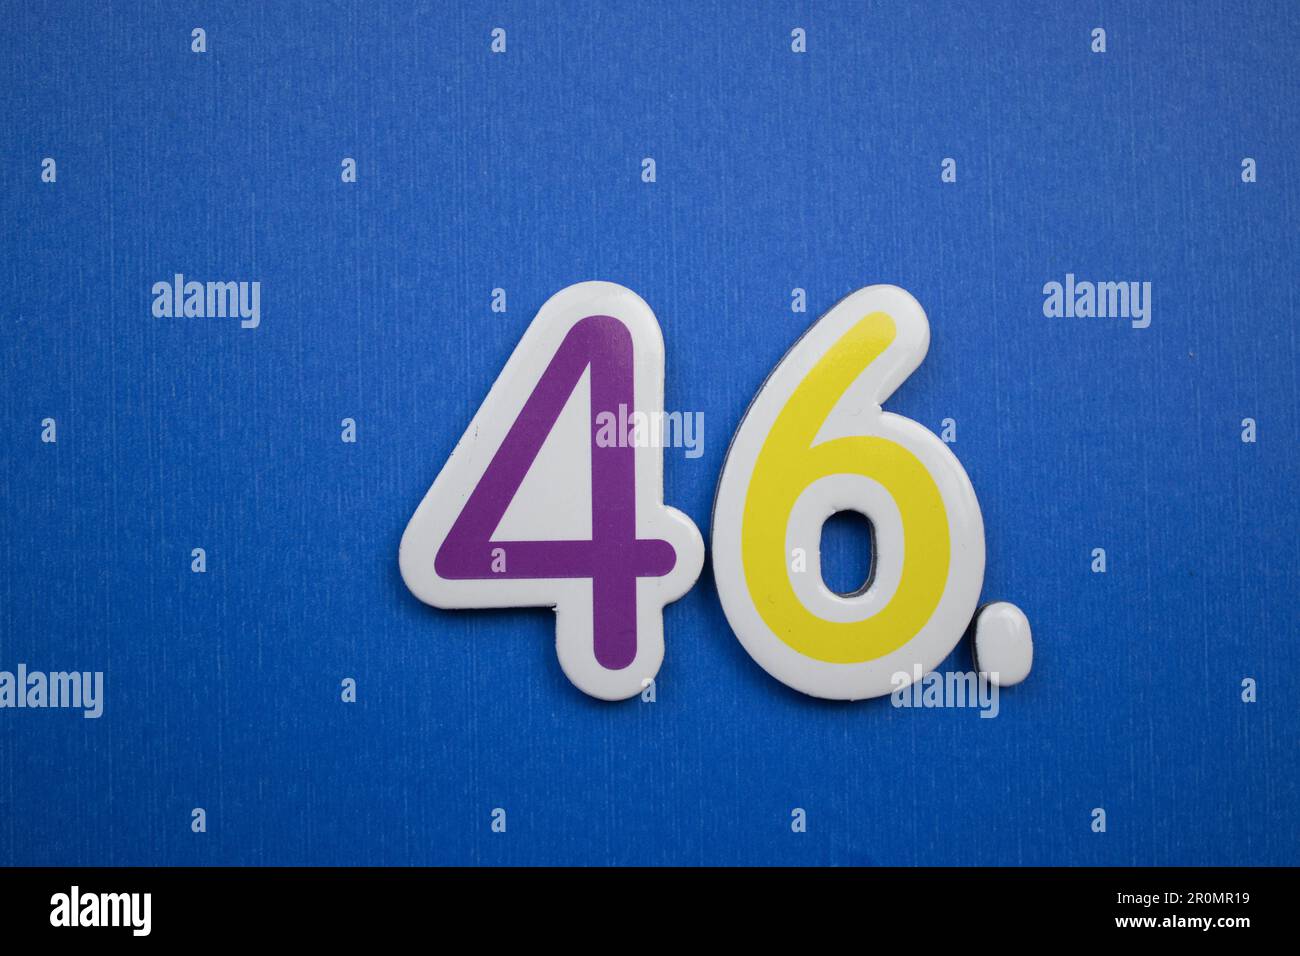 The number 46, placed on a blue background, photographed from above, colored purple and yellow. Stock Photo